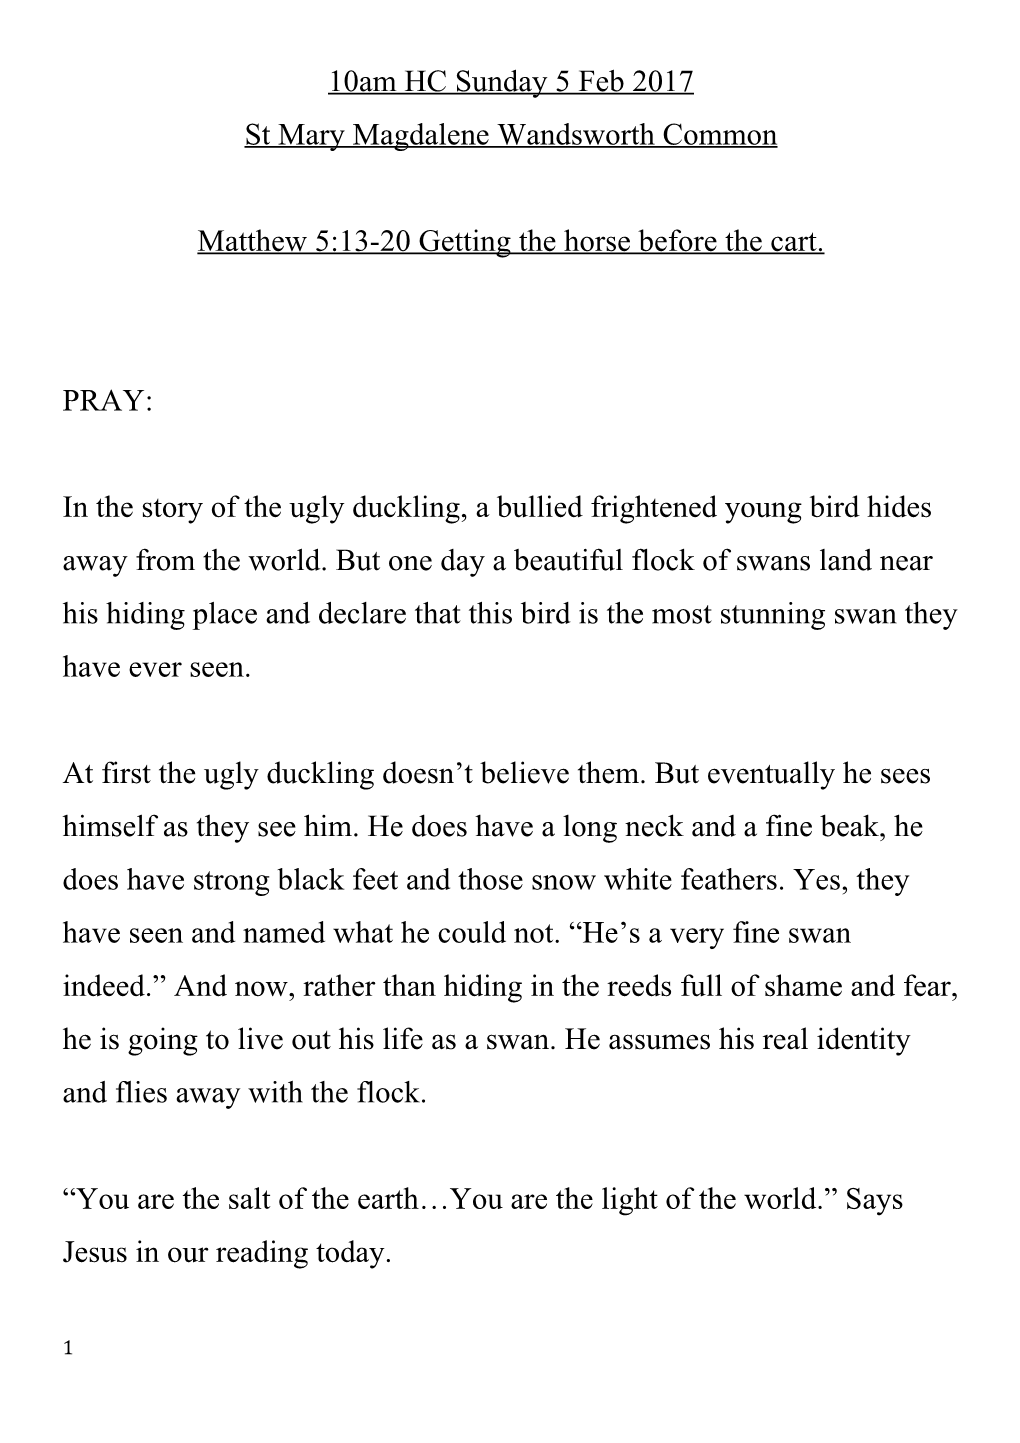 Matthew 5:13-20 Getting the Horse Before the Cart